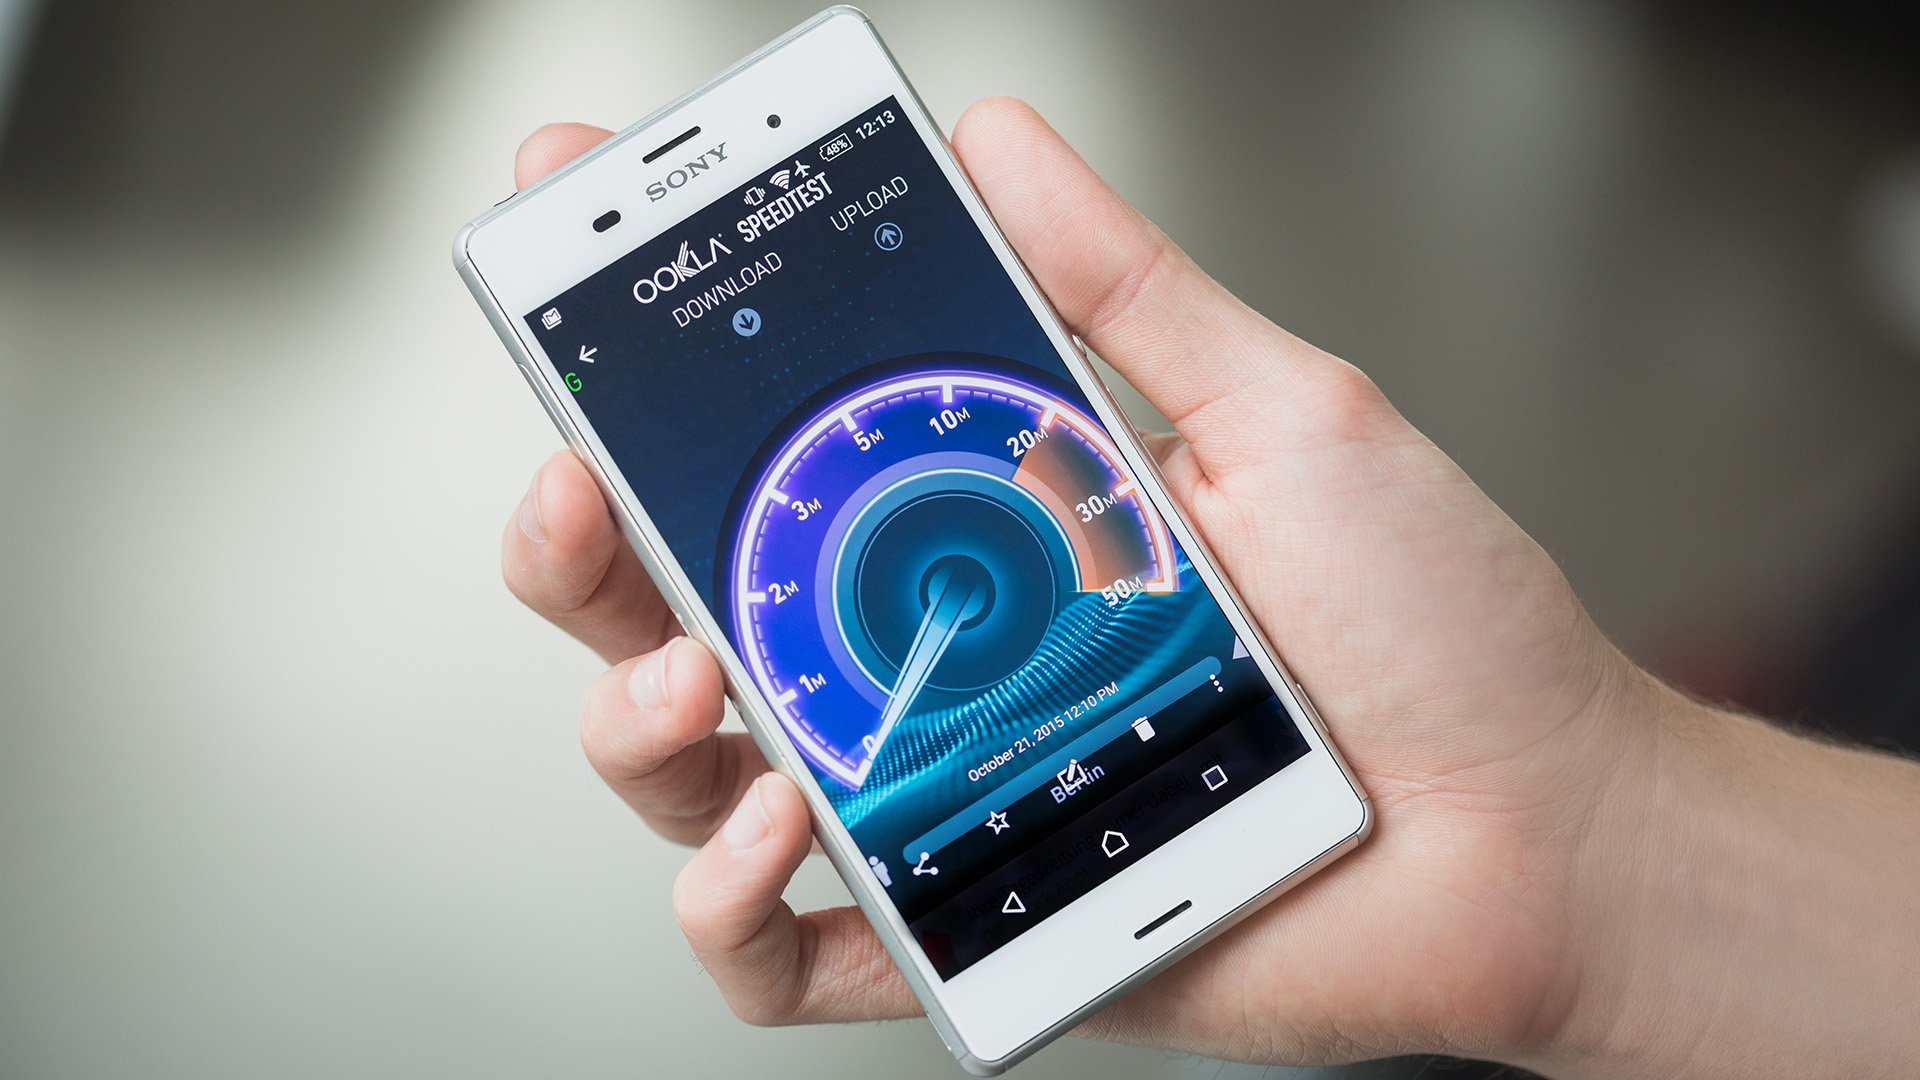 4G in Brazil loses in quality and coverage, but is ahead of Japan in speed